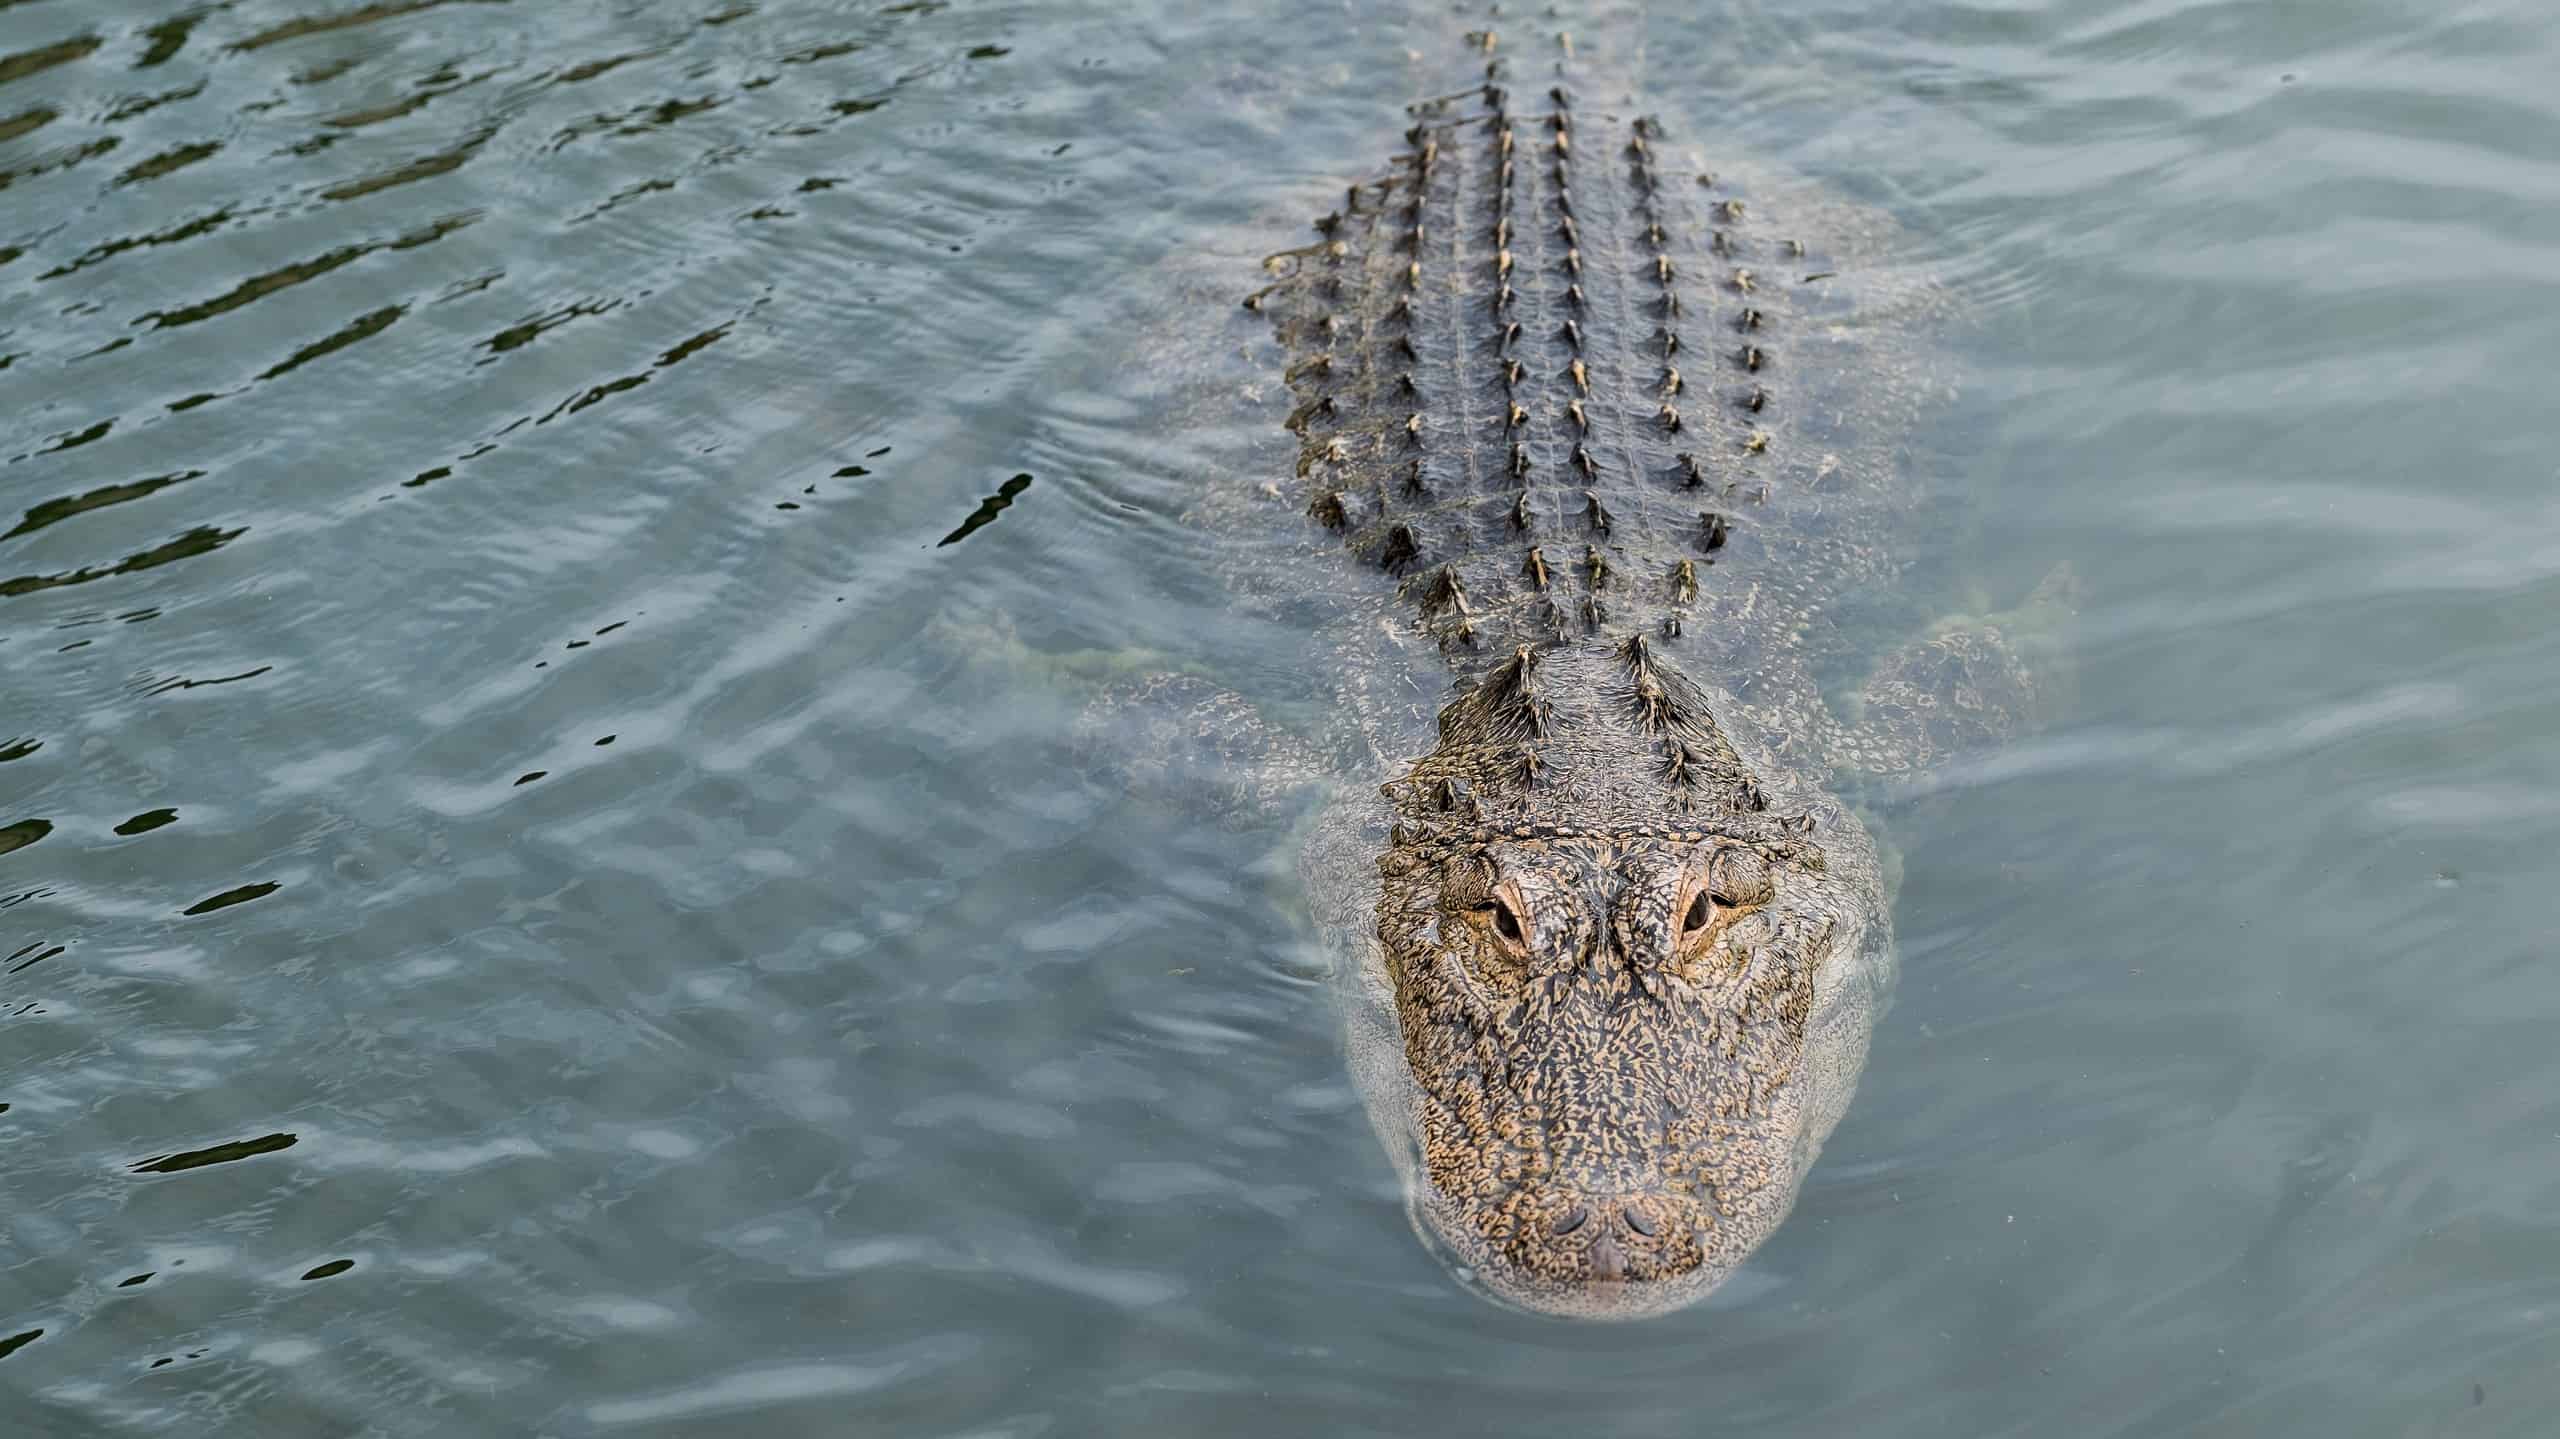 Alligator swimming through clear waters